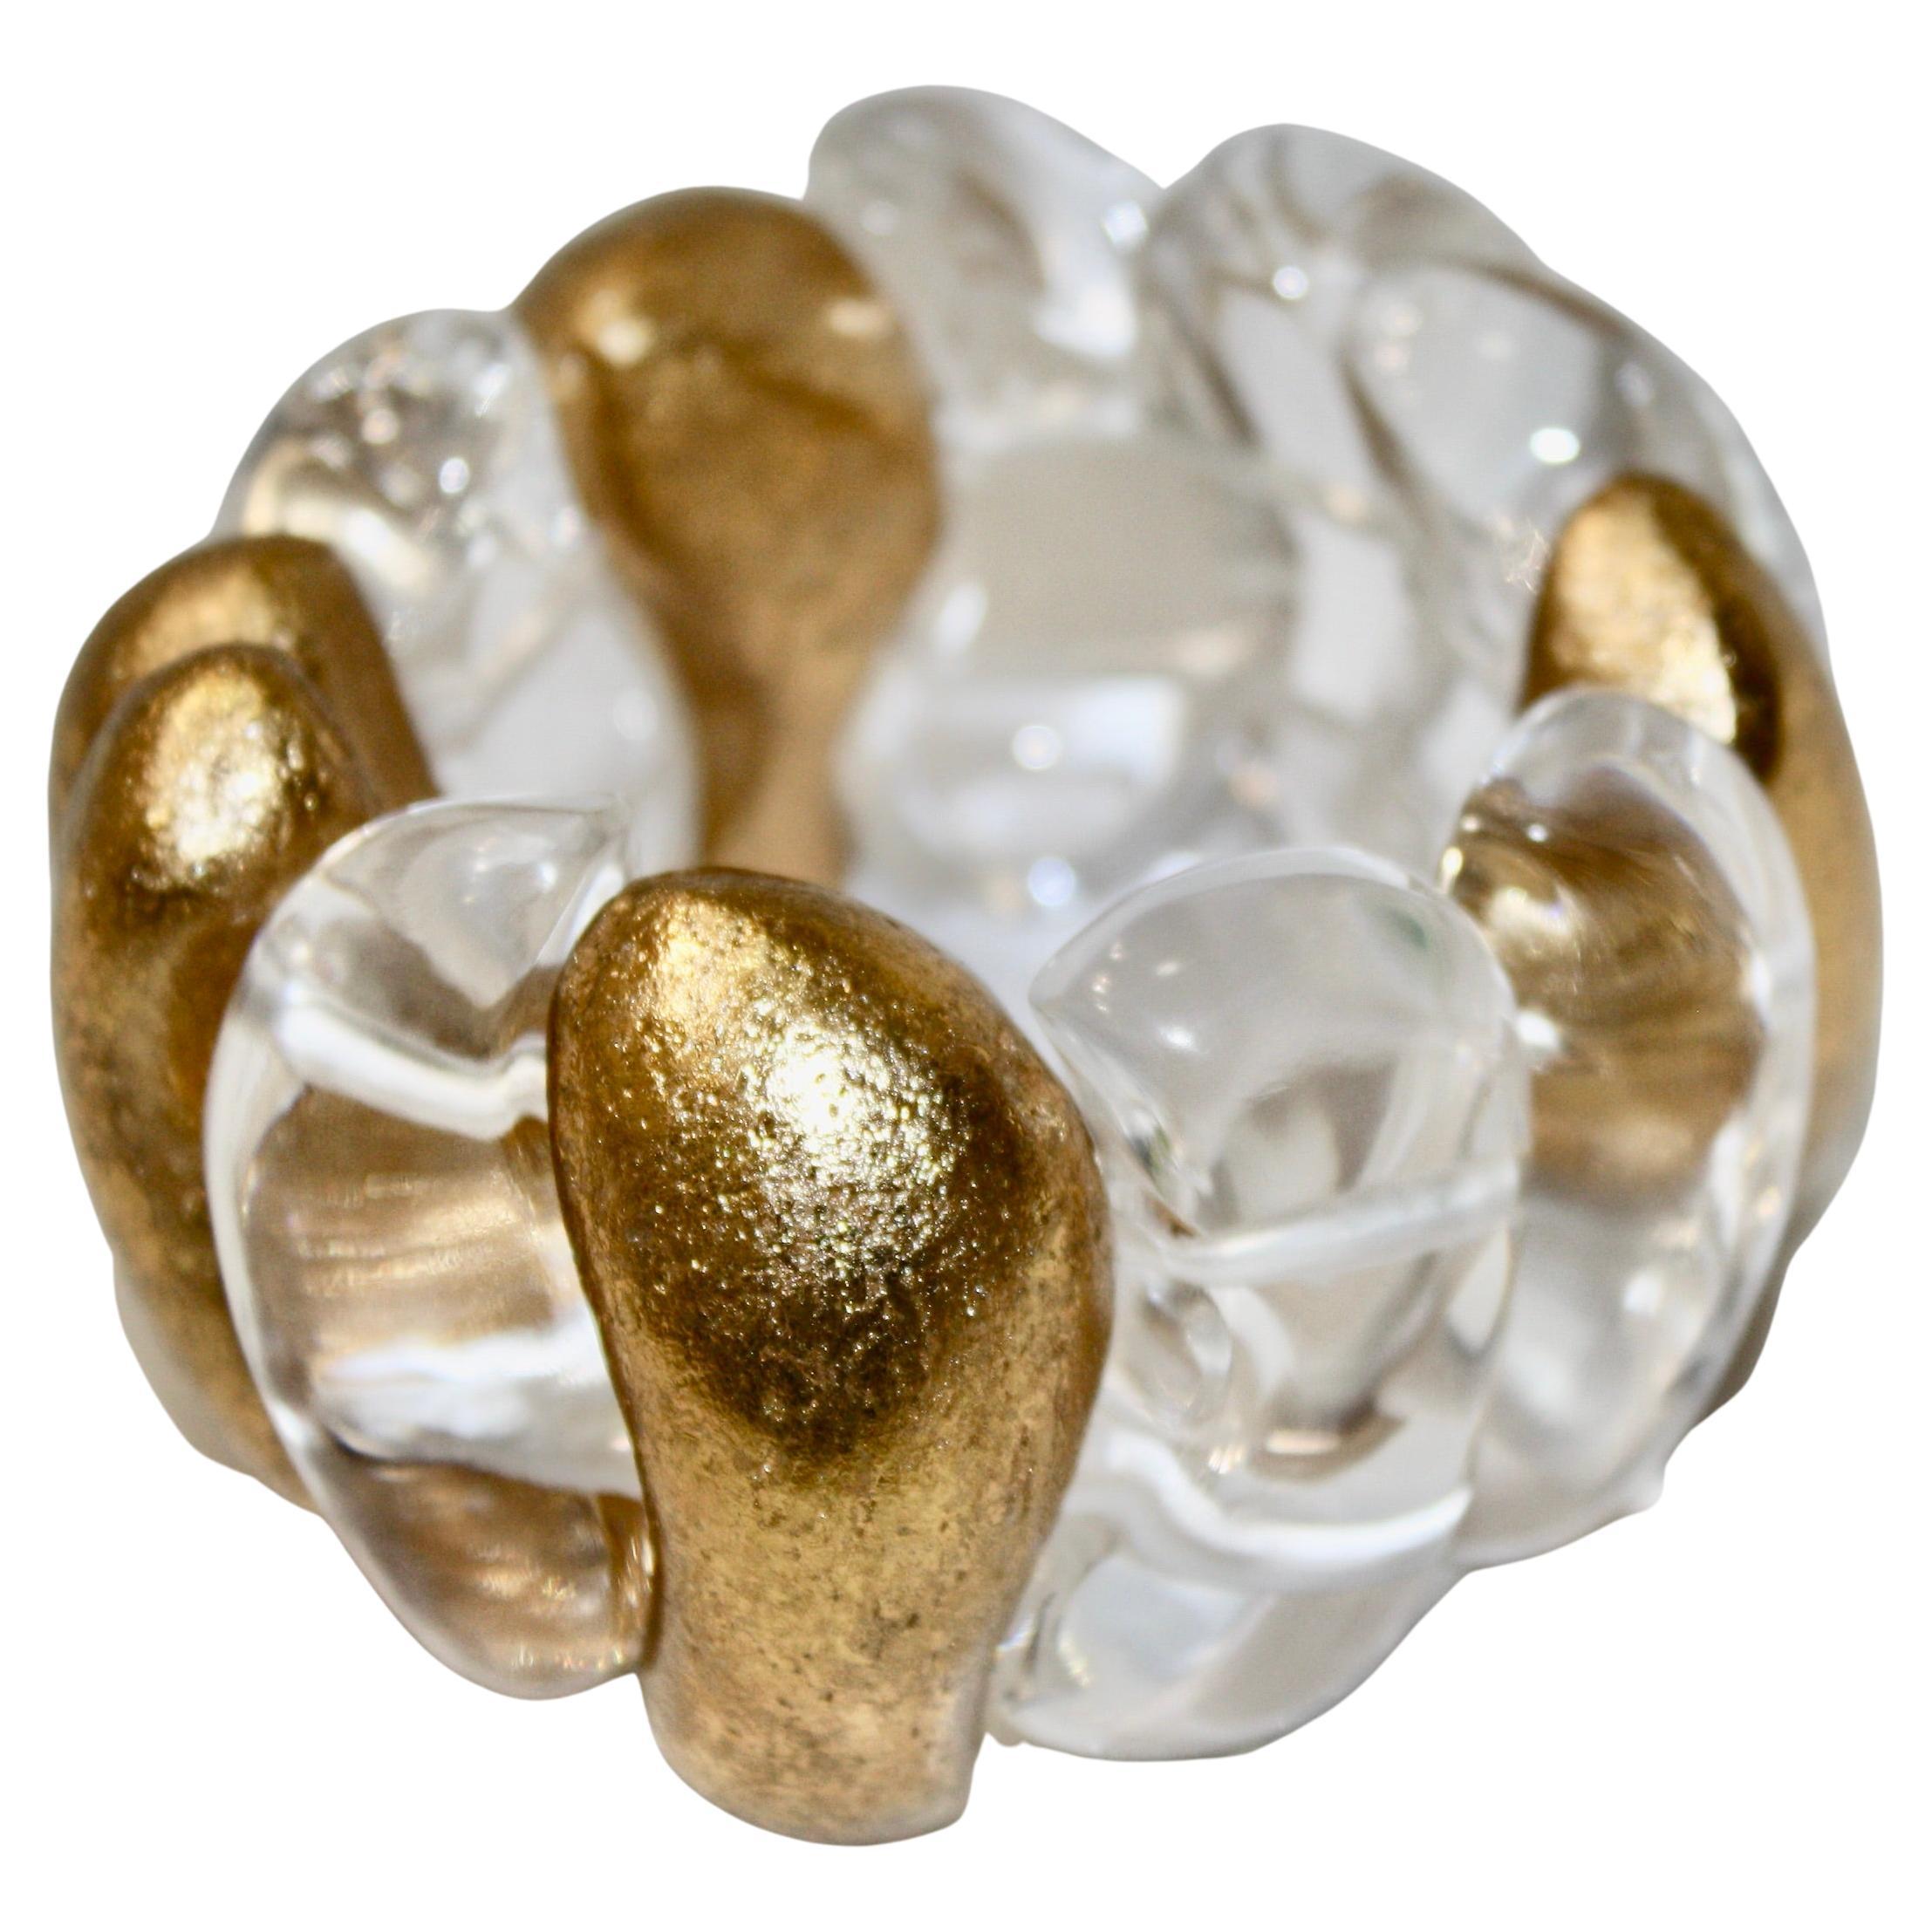 Stylish  oversized stretch bracelet by Gerda Lyngaard for Monies. Crystal clear acrylic and  acacia with gold foil application. Marked 'Monies' on a link . Size is expendable.